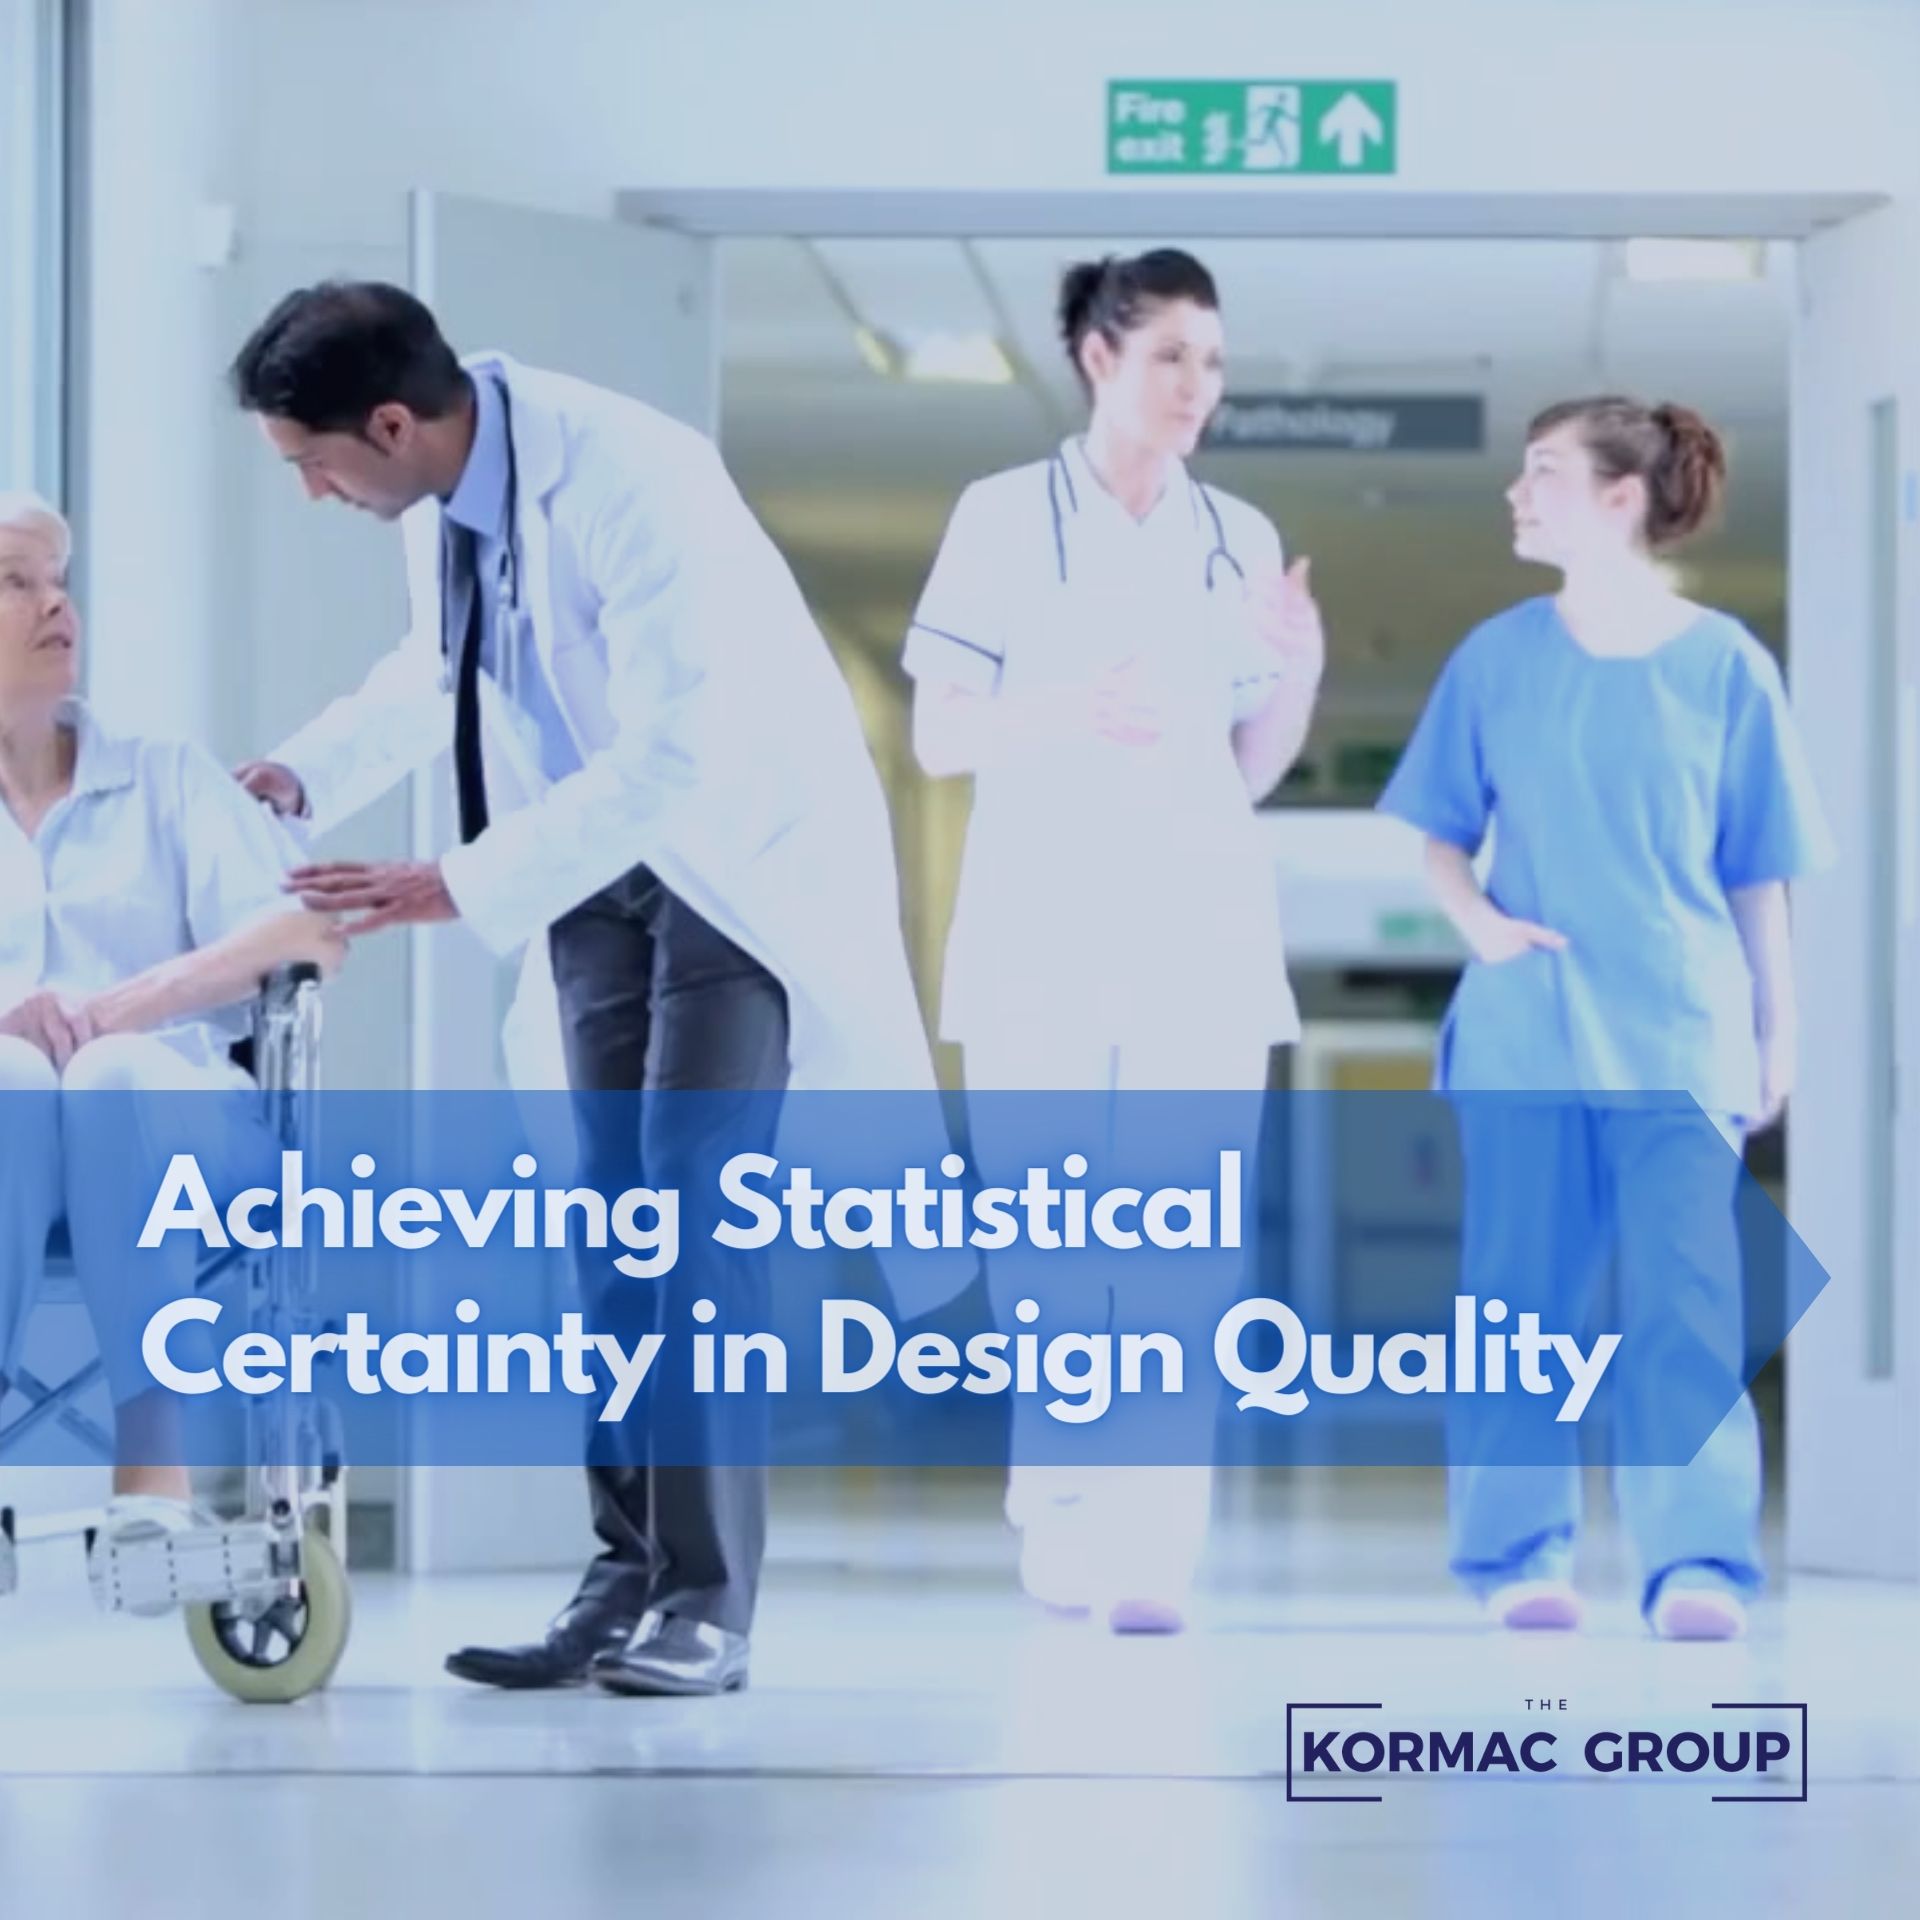 Achieving Statistical Certainty in Design Quality